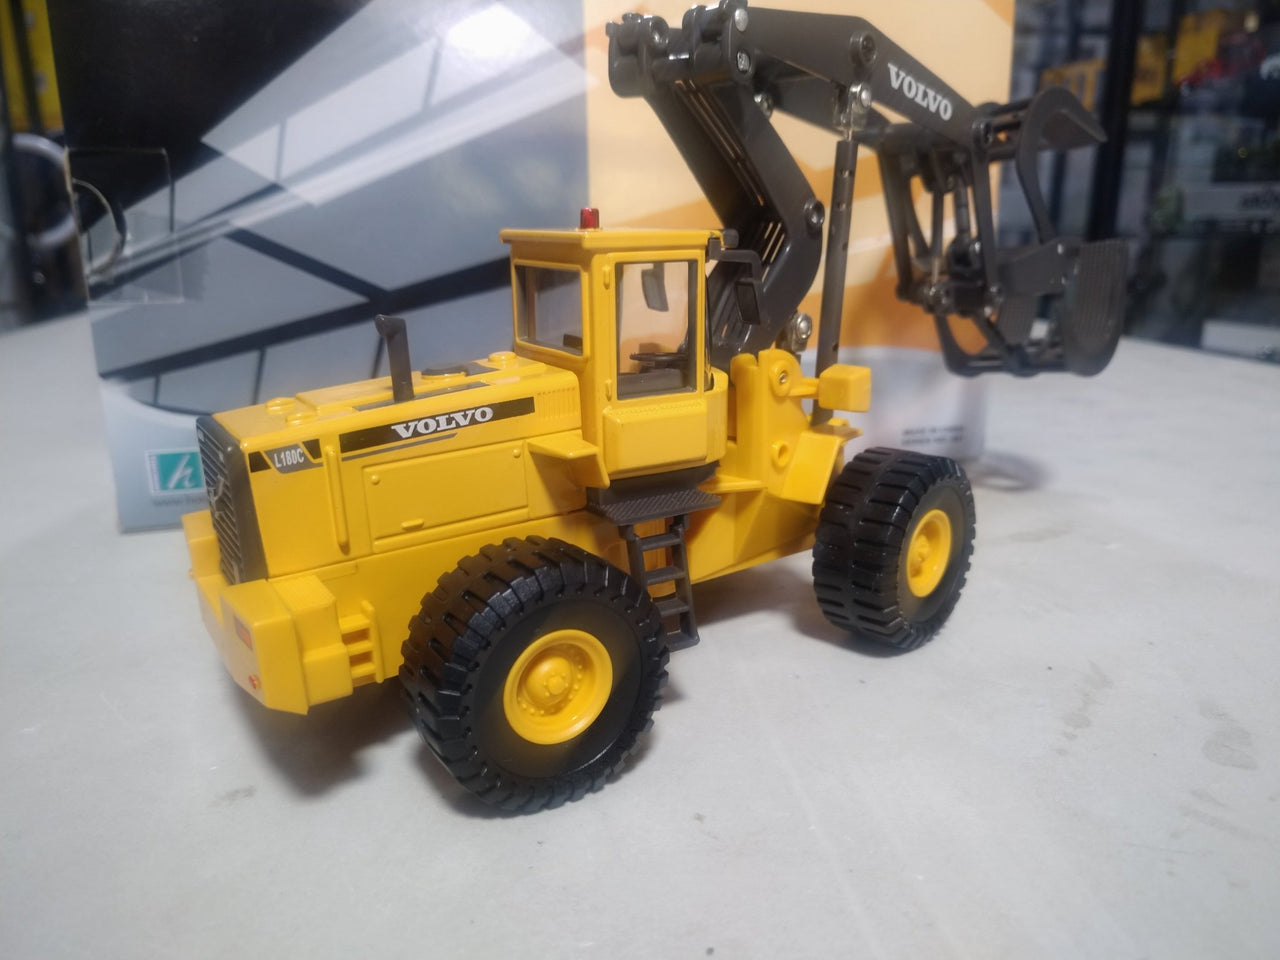 561-001 Volvo L180C Forestry Handler Scale 1:50 (Discontinued Model)